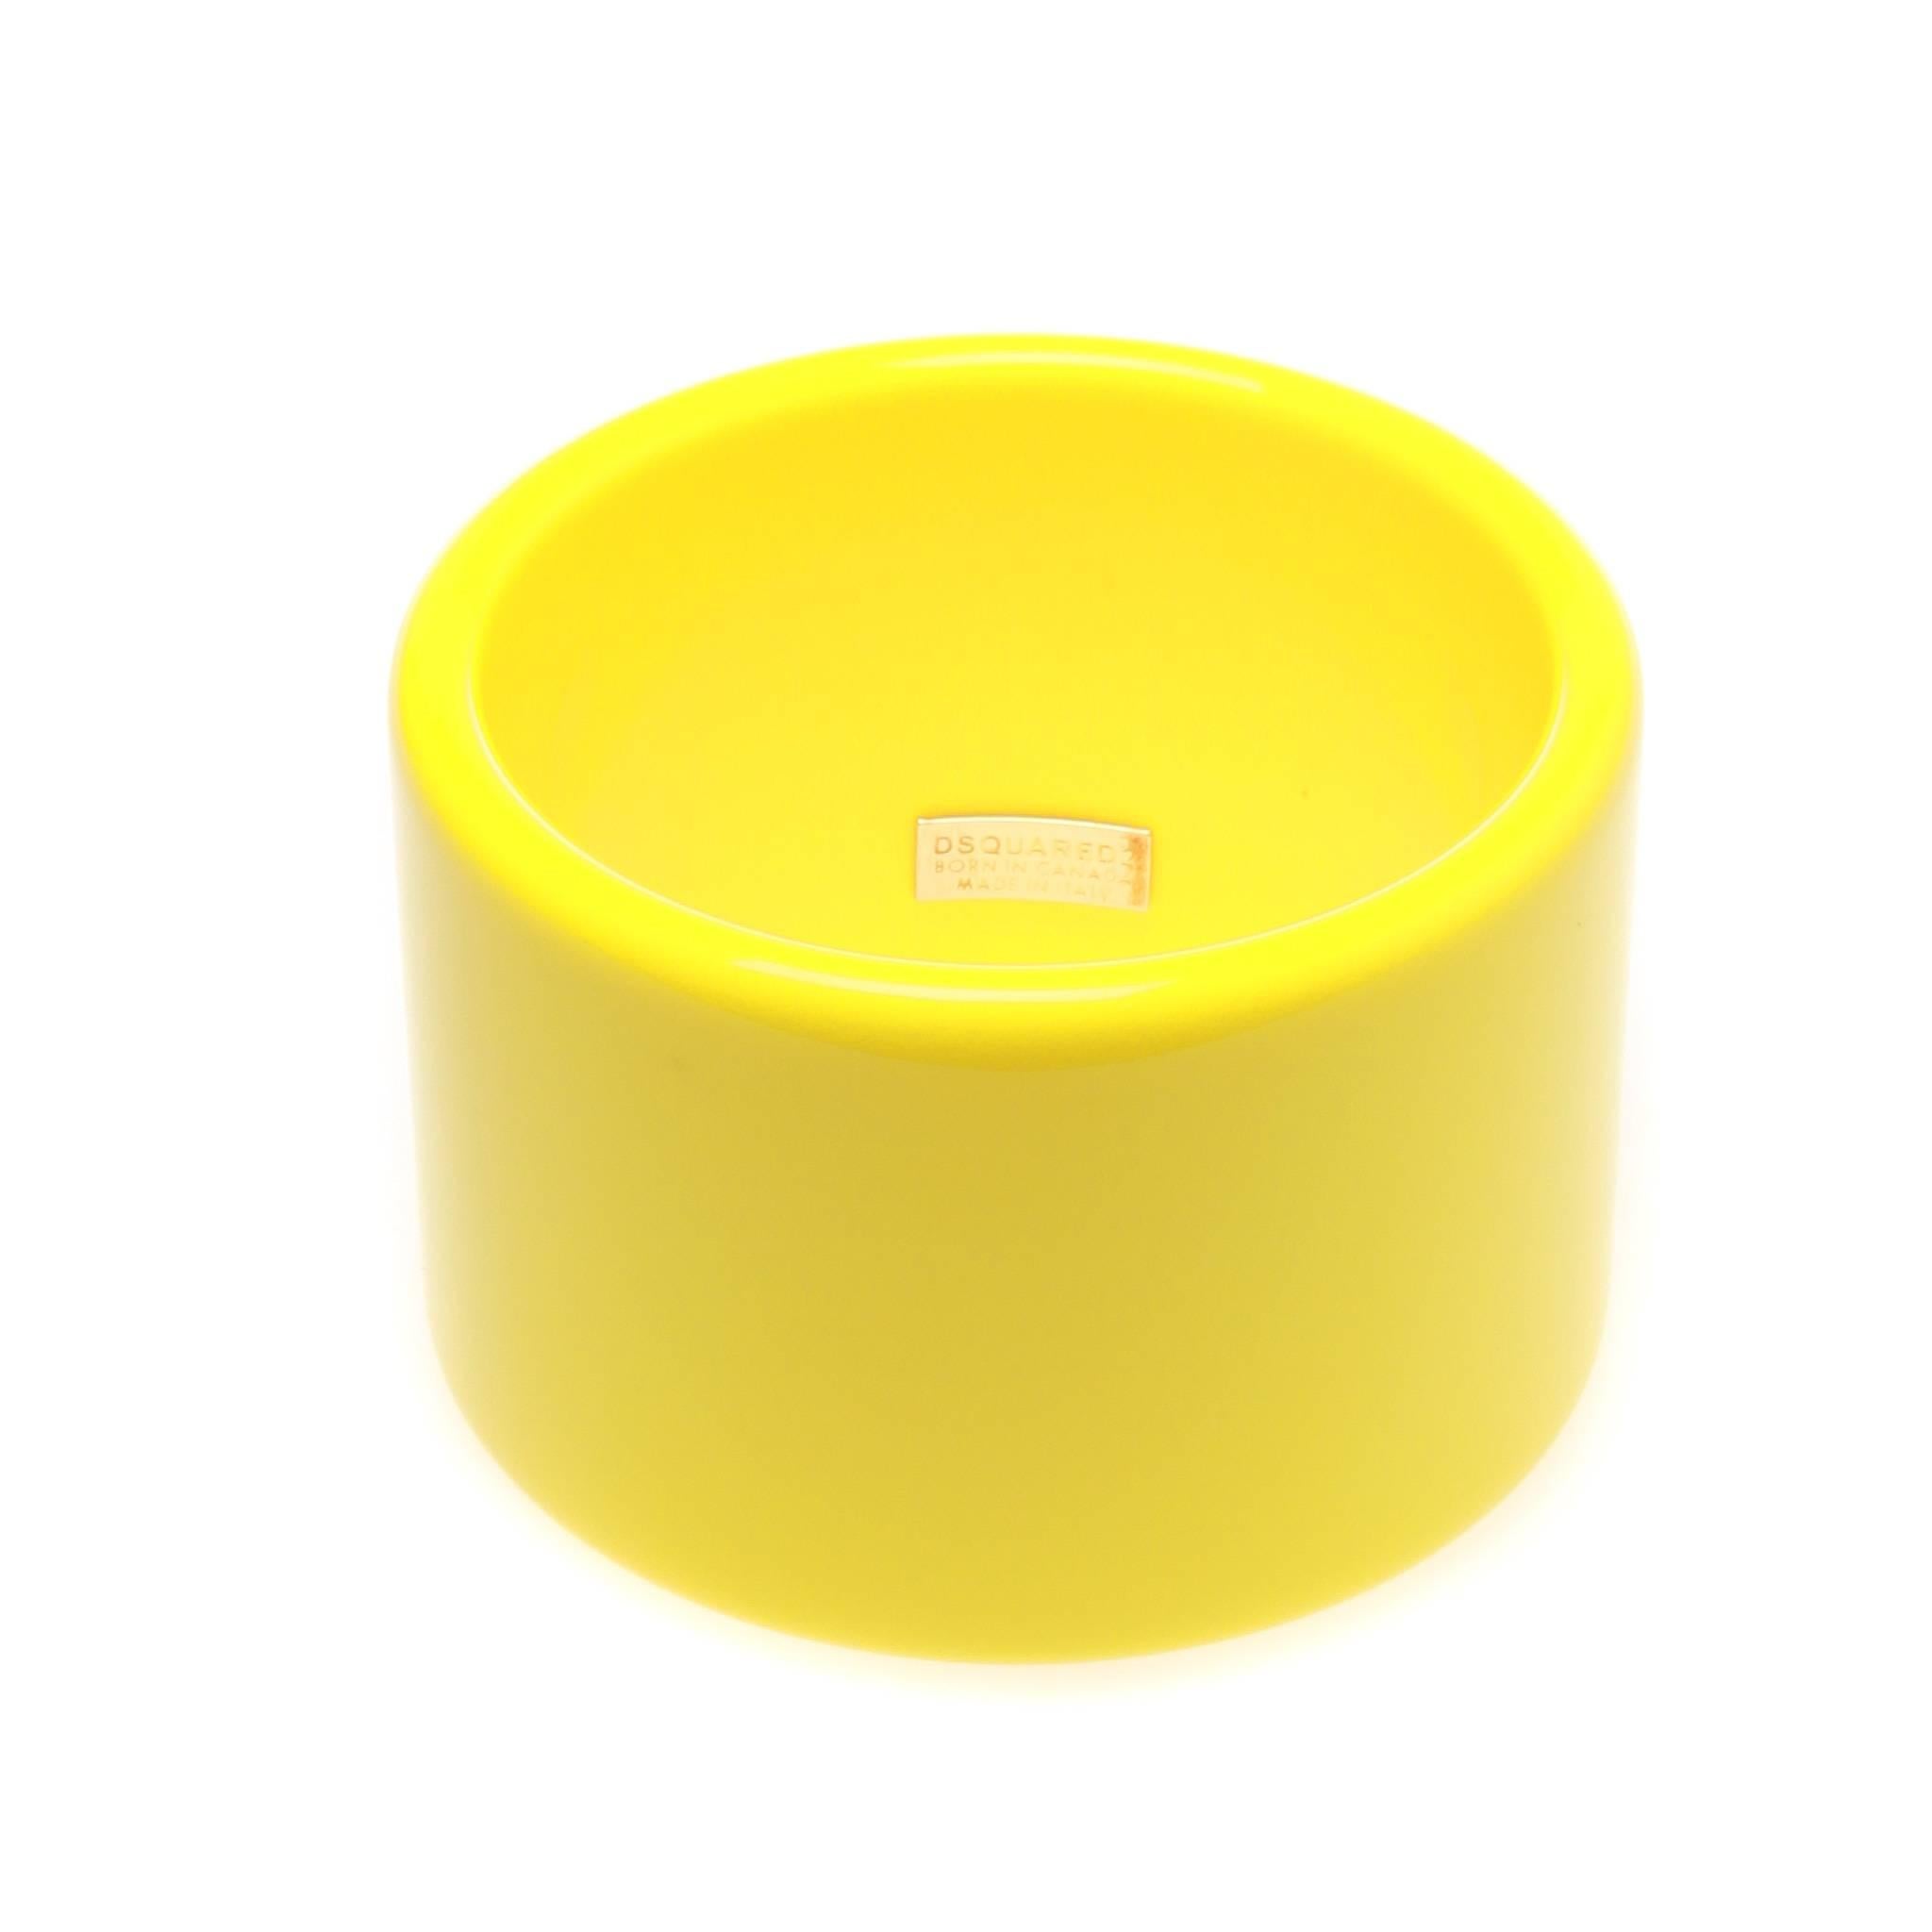 DSQUARED2 perspex round cuff in yellow. 

Comes with box.